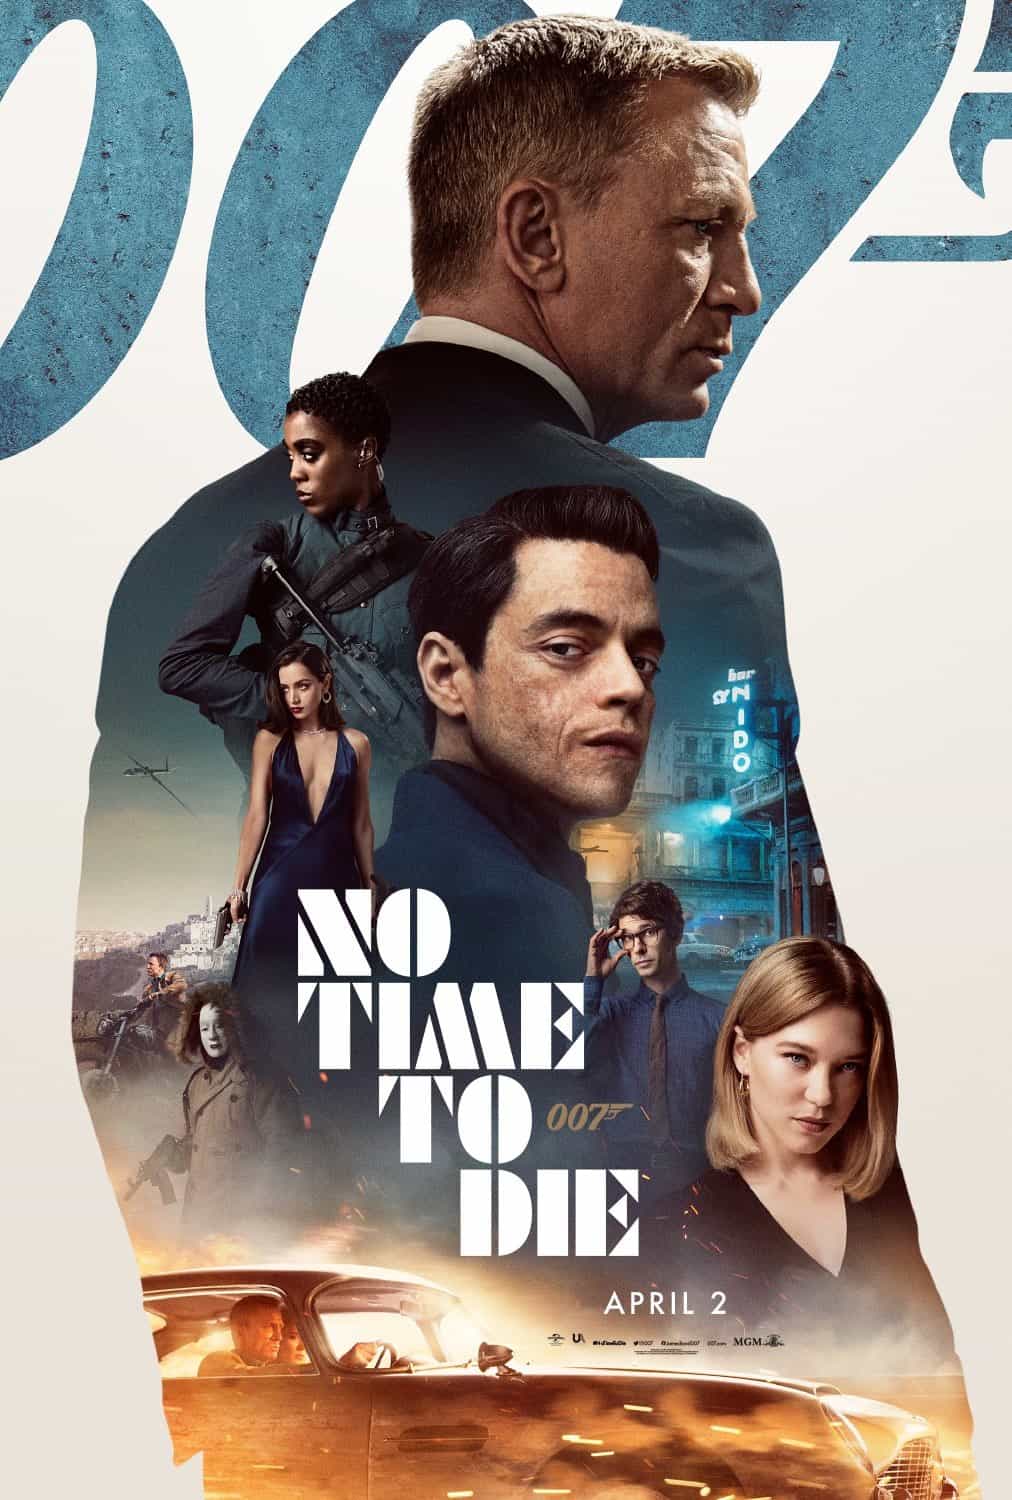 No Time To Die gets moved, again, from April 2nd to October 8th